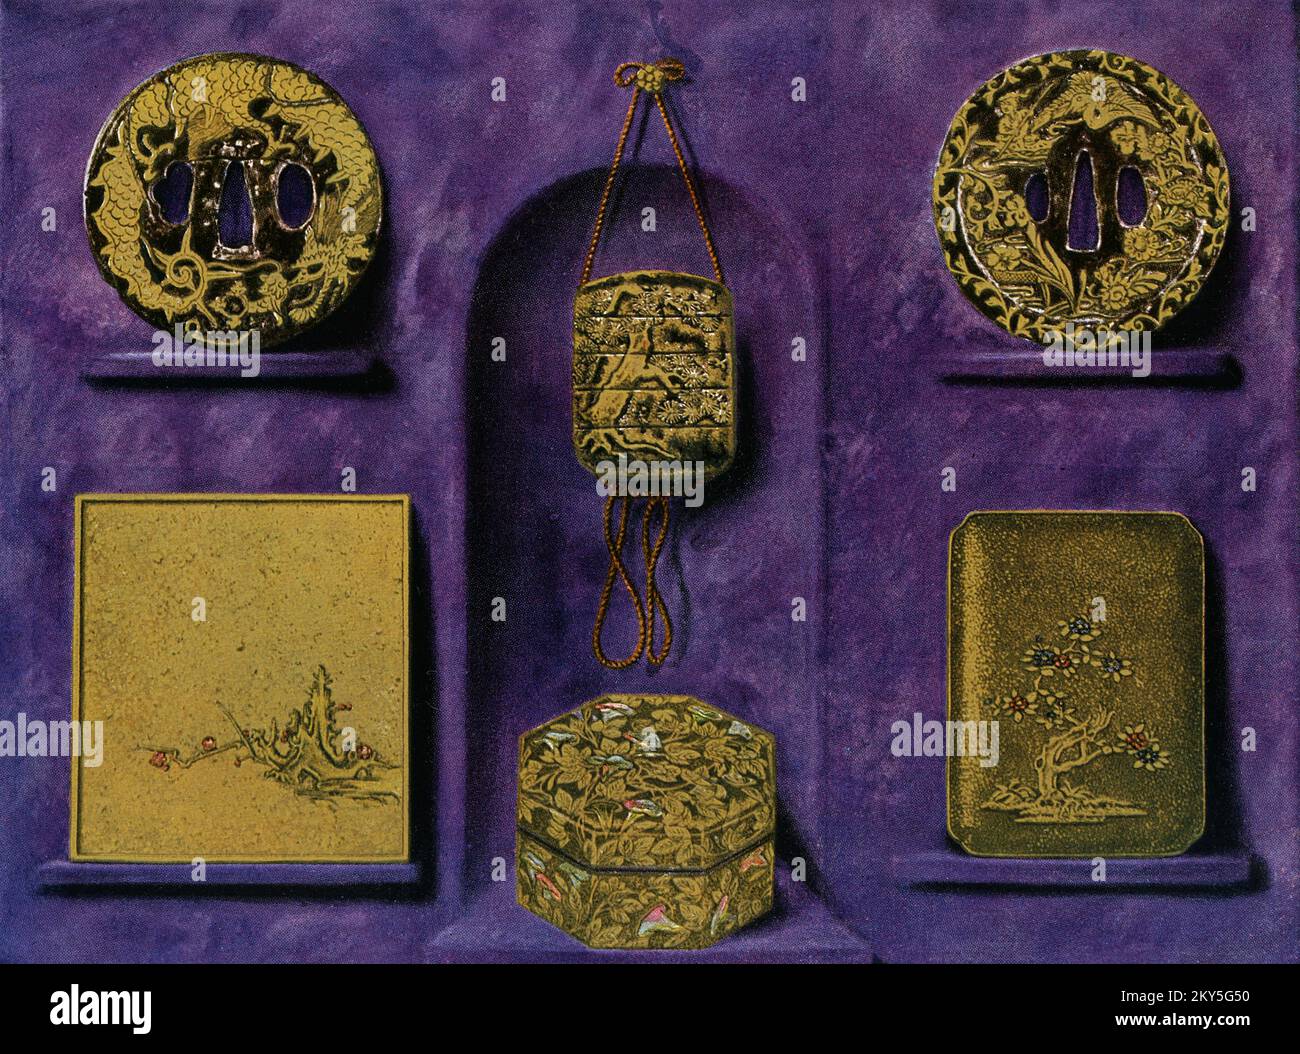 This image shows: “Arts and crafts from the Tokugawa period: Gold lacquer and trade work—bottom row, from left to right: inside of a writing box cover with coral inlay (about 1700)—box with morning glory inlaid with mother-of-pearl (about 1630)— Writing box lid with coral inlay (about 1680). Top Row (middle): medicine box with gold foil top (beginning of 17th century)—Top Row (right and left): box with wrought iron with brass inlay (end of 16th -beginning of 17th century). The Edo period or Tokugawa period is the period between 1603 and 1867 in the history of Japan, when Japan was under the ru Stock Photo